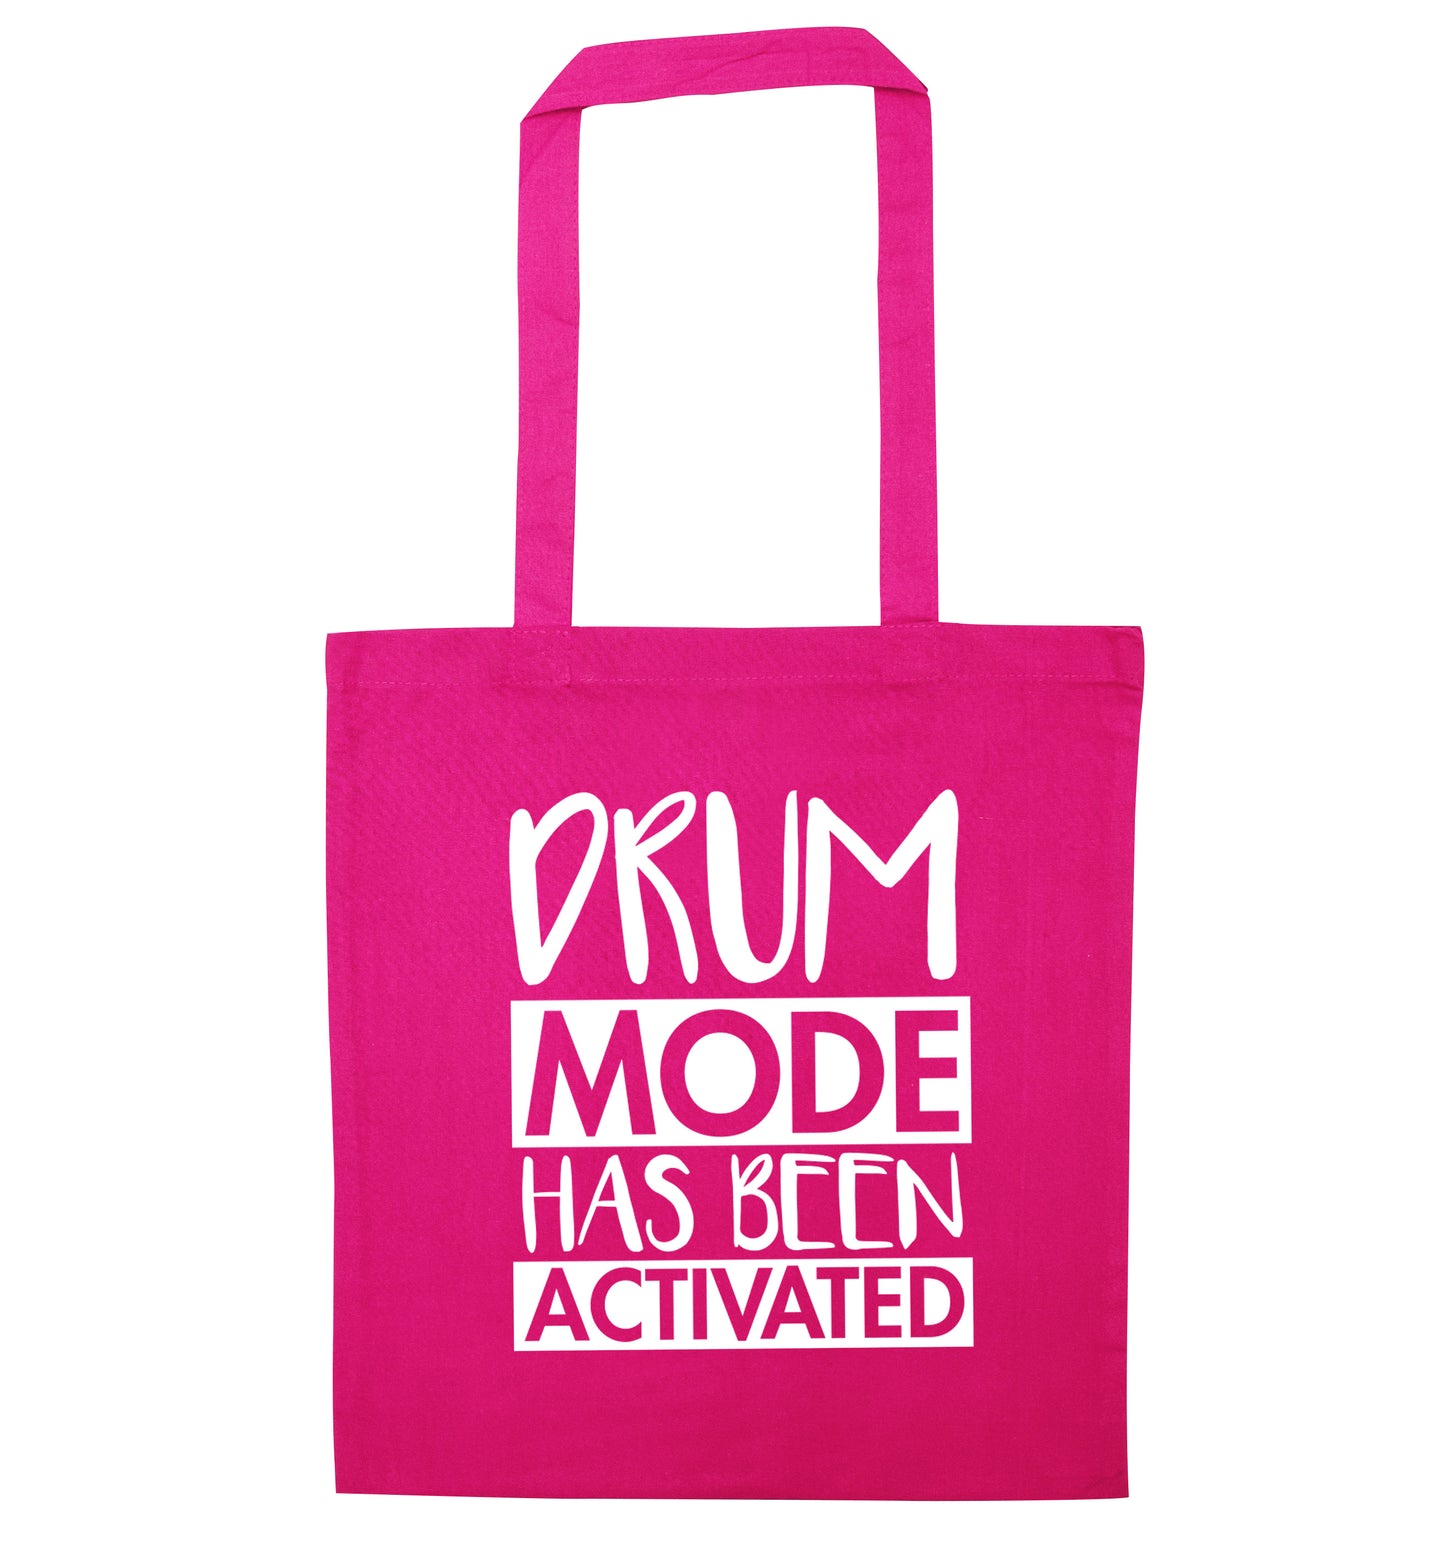 Drum mode activated pink tote bag